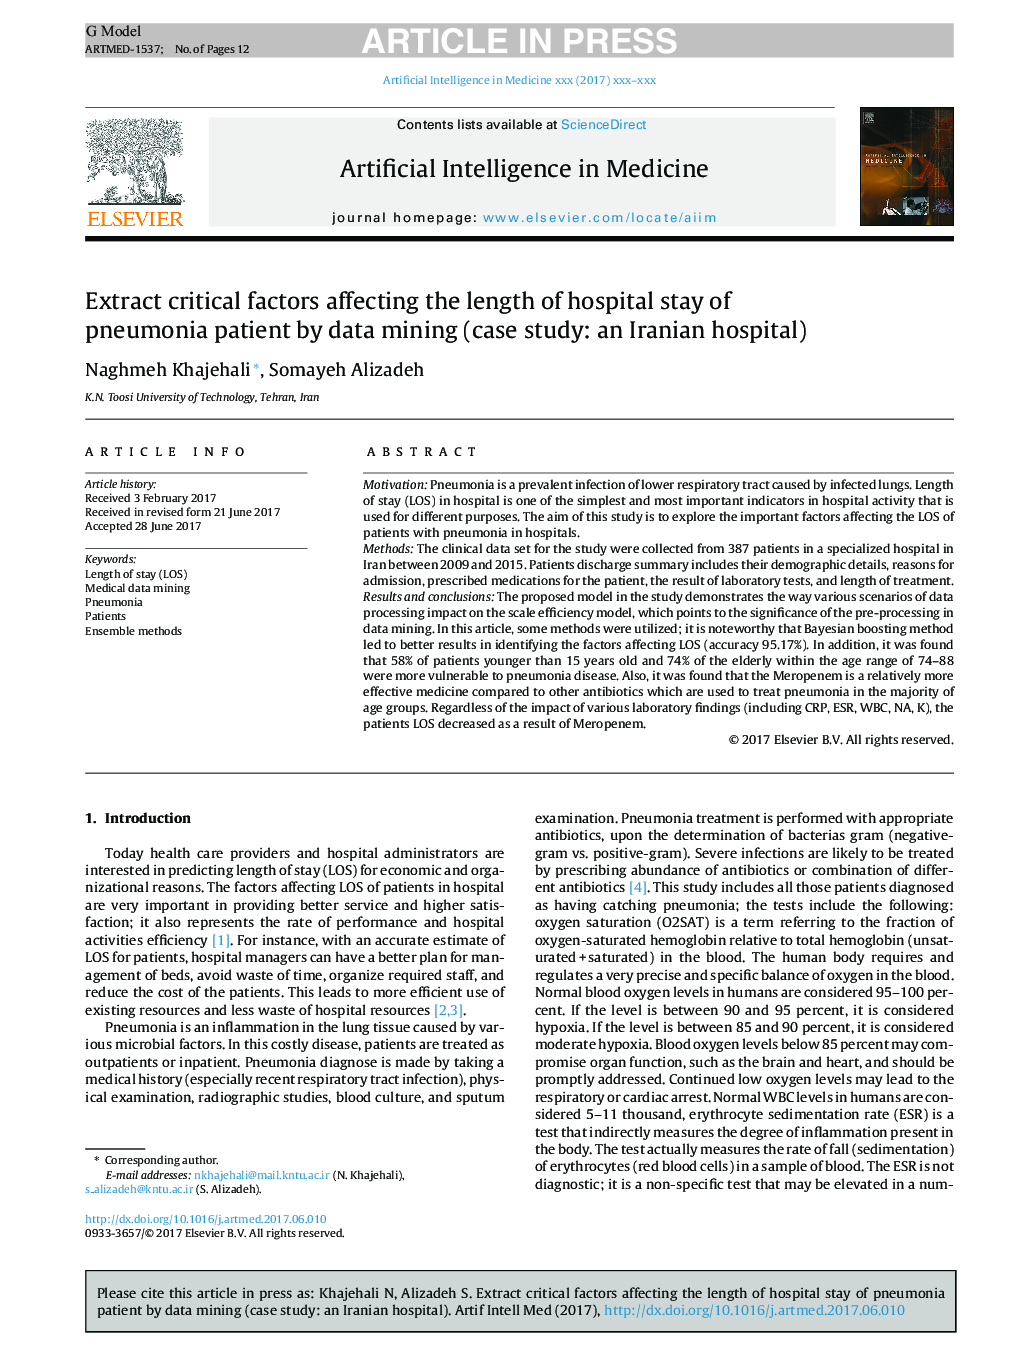 Extract critical factors affecting the length of hospital stay of pneumonia patient by data mining (case study: an Iranian hospital)